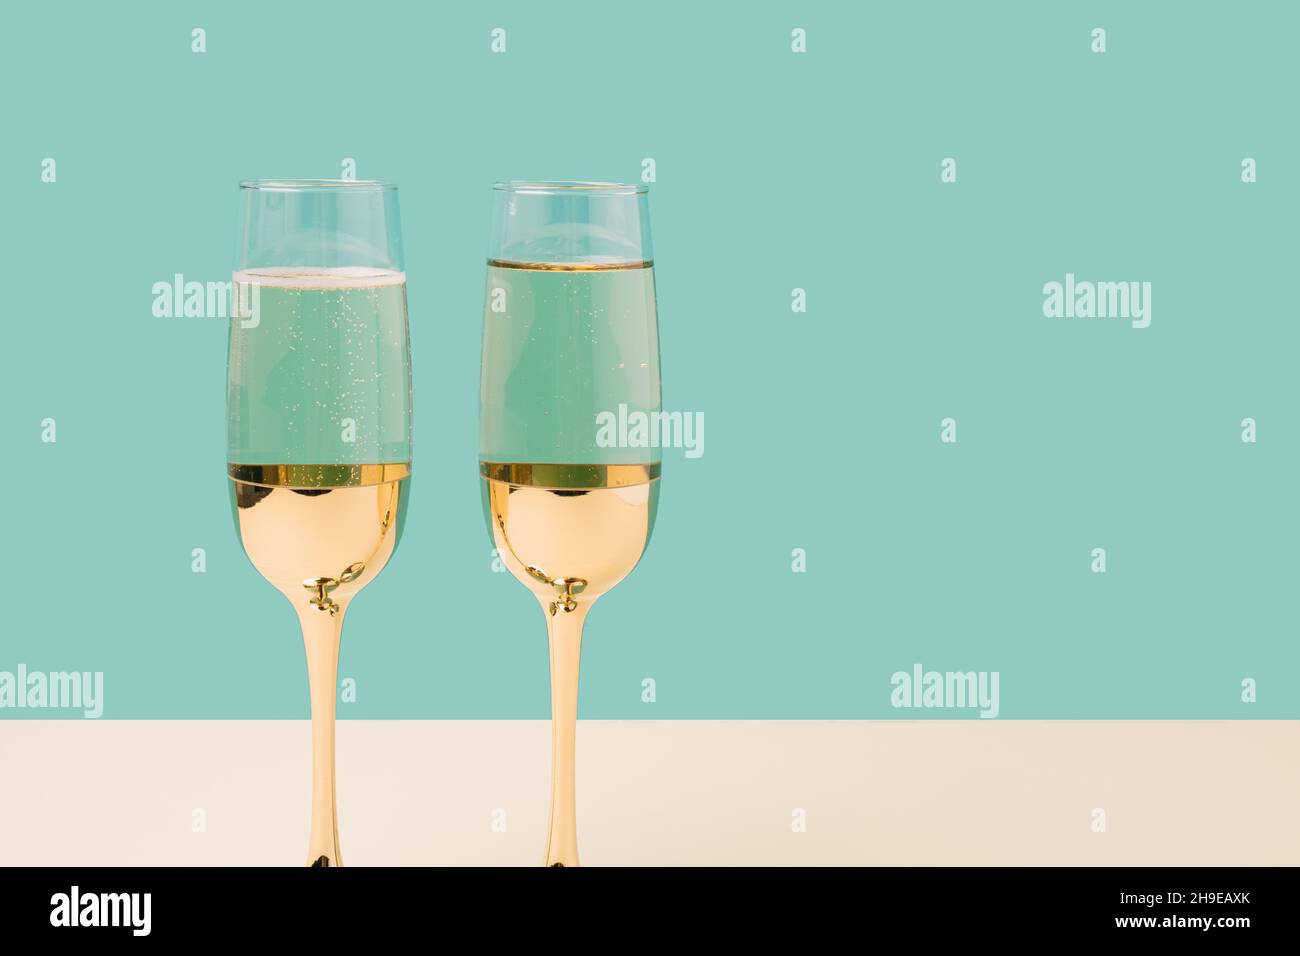 Romantic champagne glasses set up on a turquoise background. Minimal Valentines concept Stock Photo